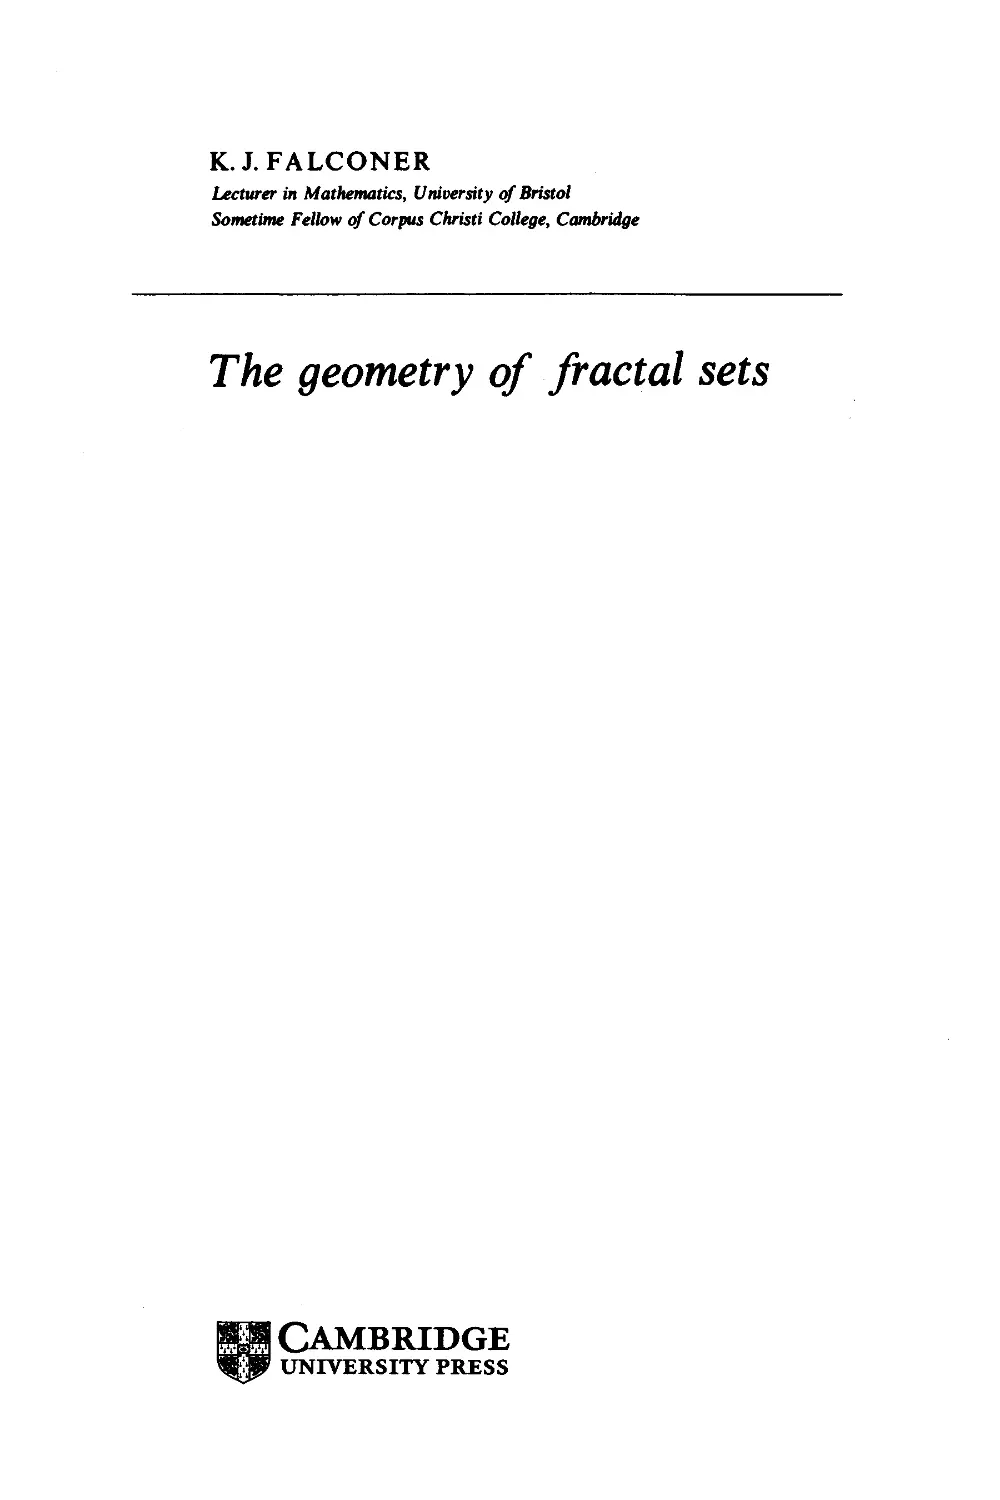 The geometry of fractal sets